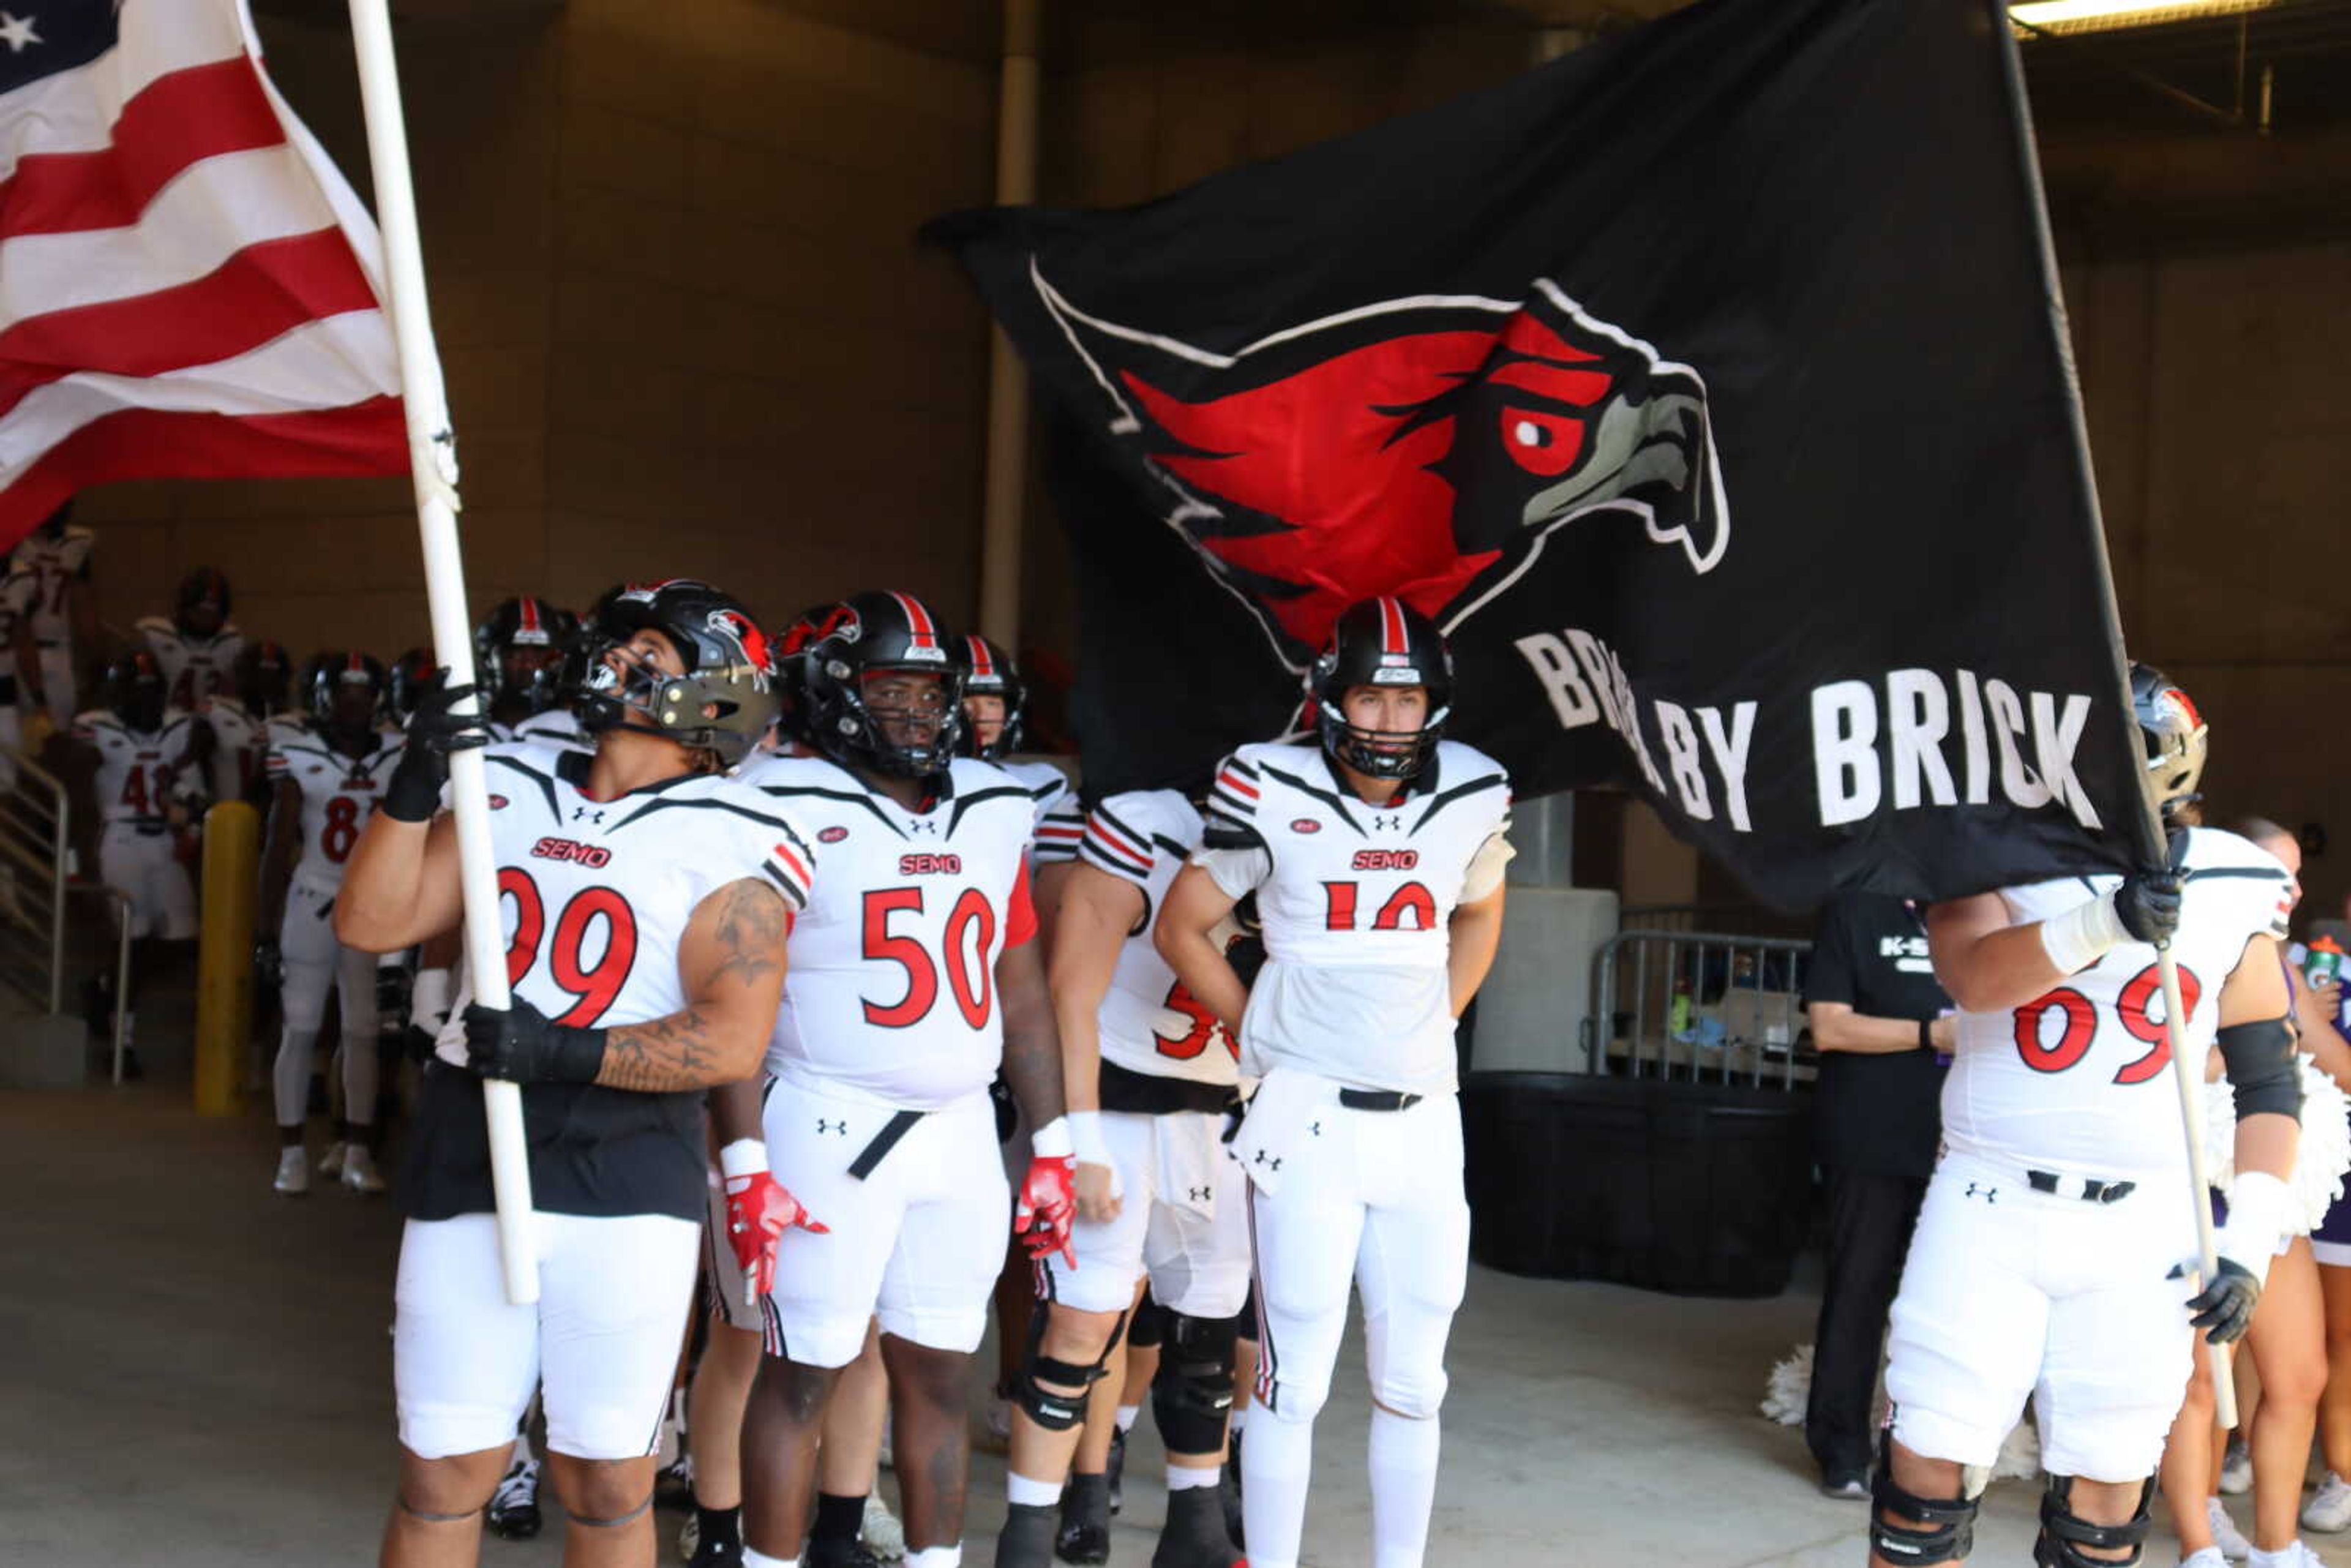 The Redhawks are led onto the field by senior defensive linemen Steven Lewis (99), Lunden Manuel (50),  junior quarterback Paxton DeLaurent (10) and  junior offensive lineman Kobe Sixkiller (69), before losing 45-0 to the Kansas State Wildcats on Sept. 2 at Bill Snyder Family Stadium in Manhattan, KS.